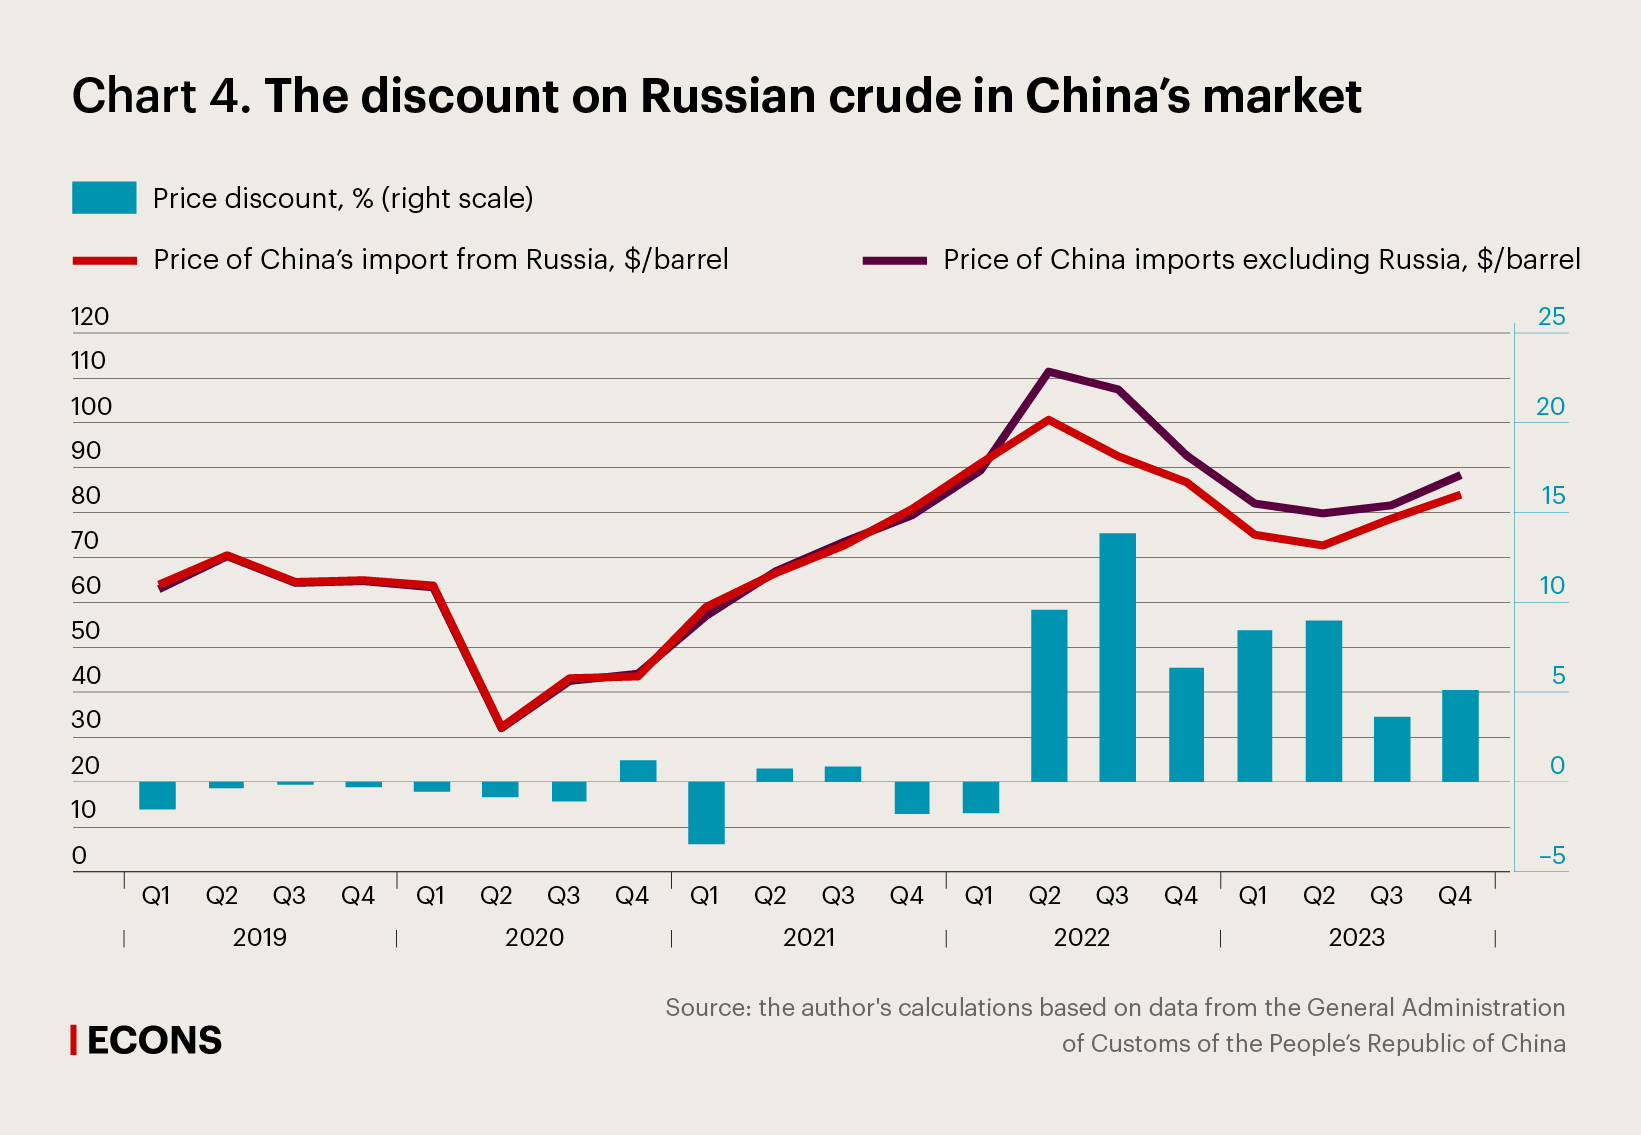 The discount on Russian crude in China’s market